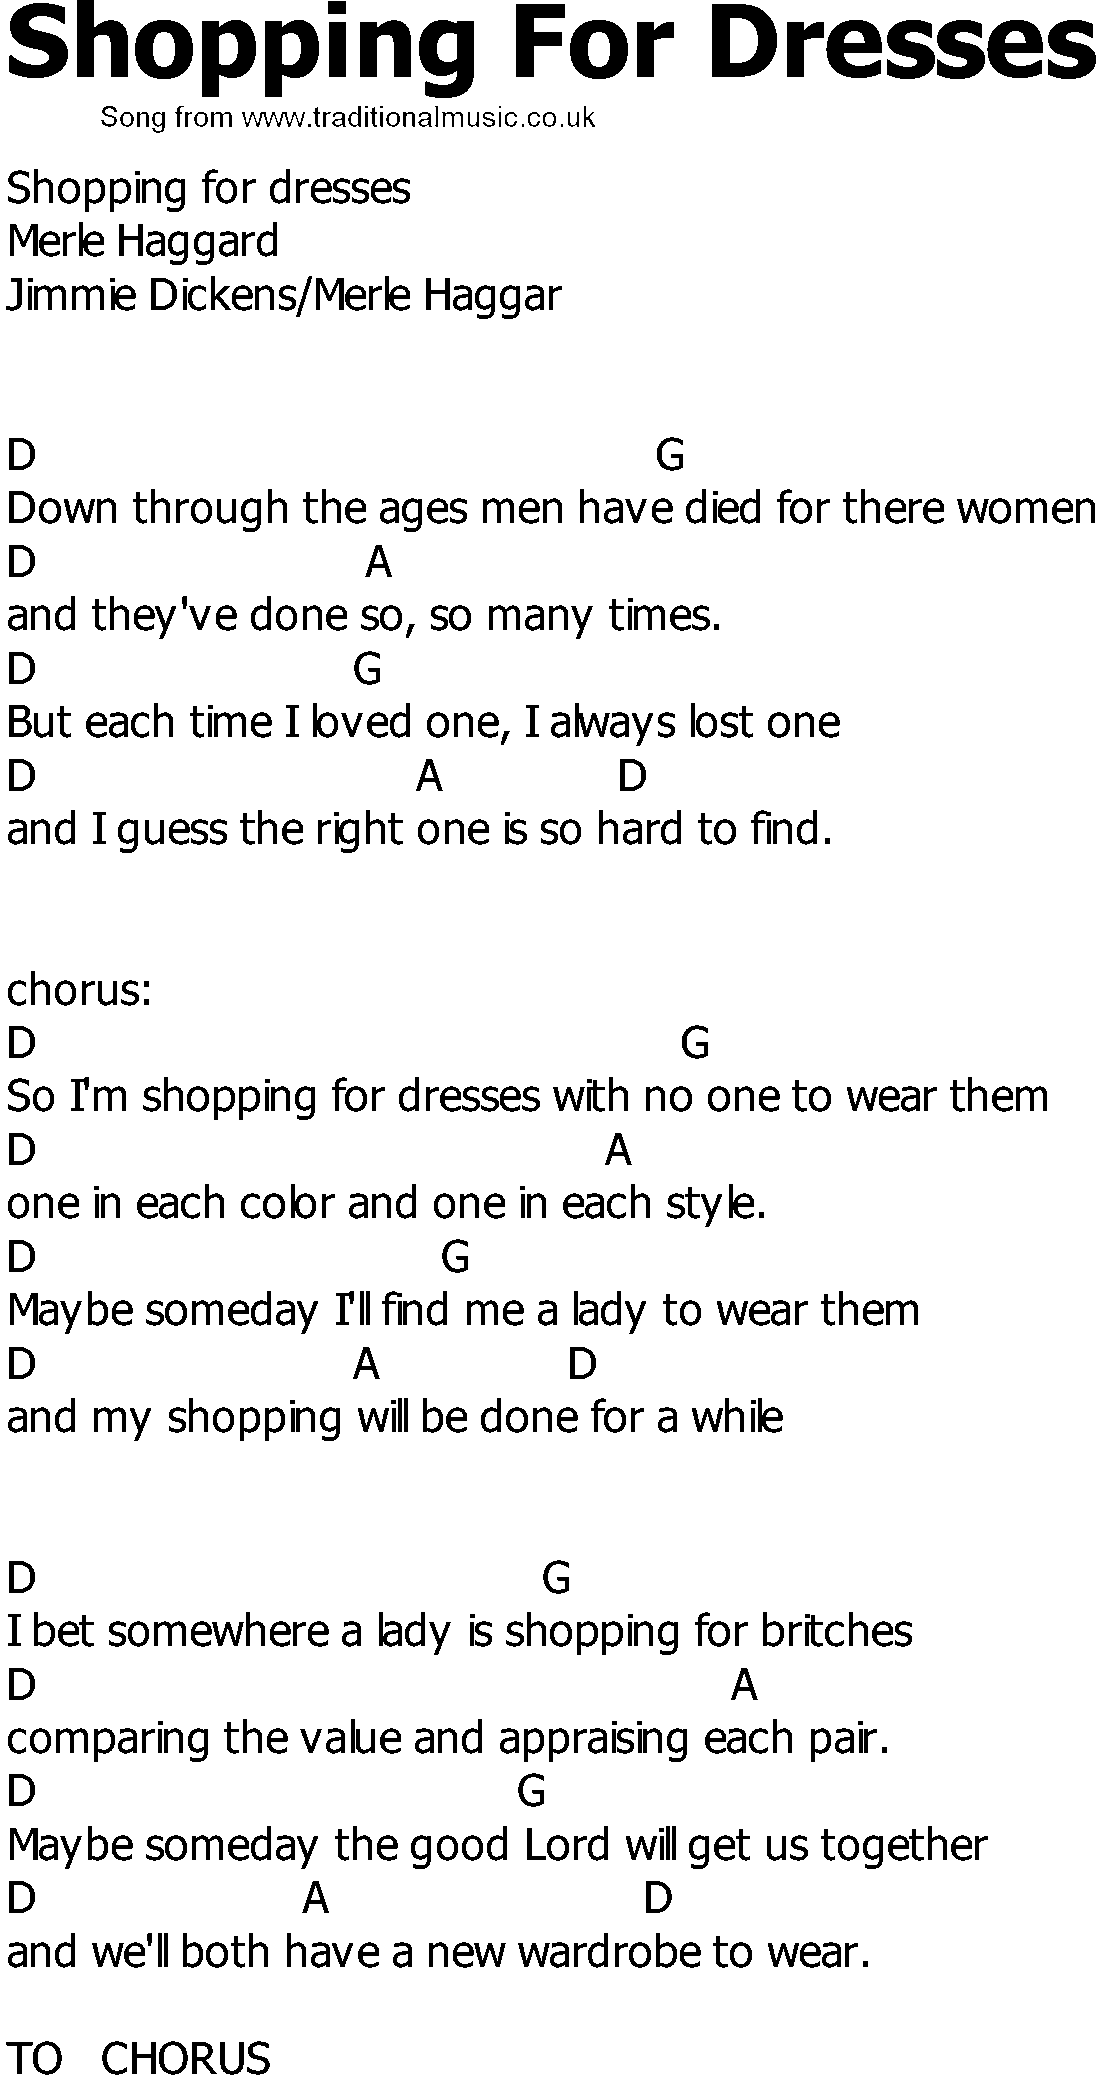 Old Country song lyrics with chords - Shopping For Dresses